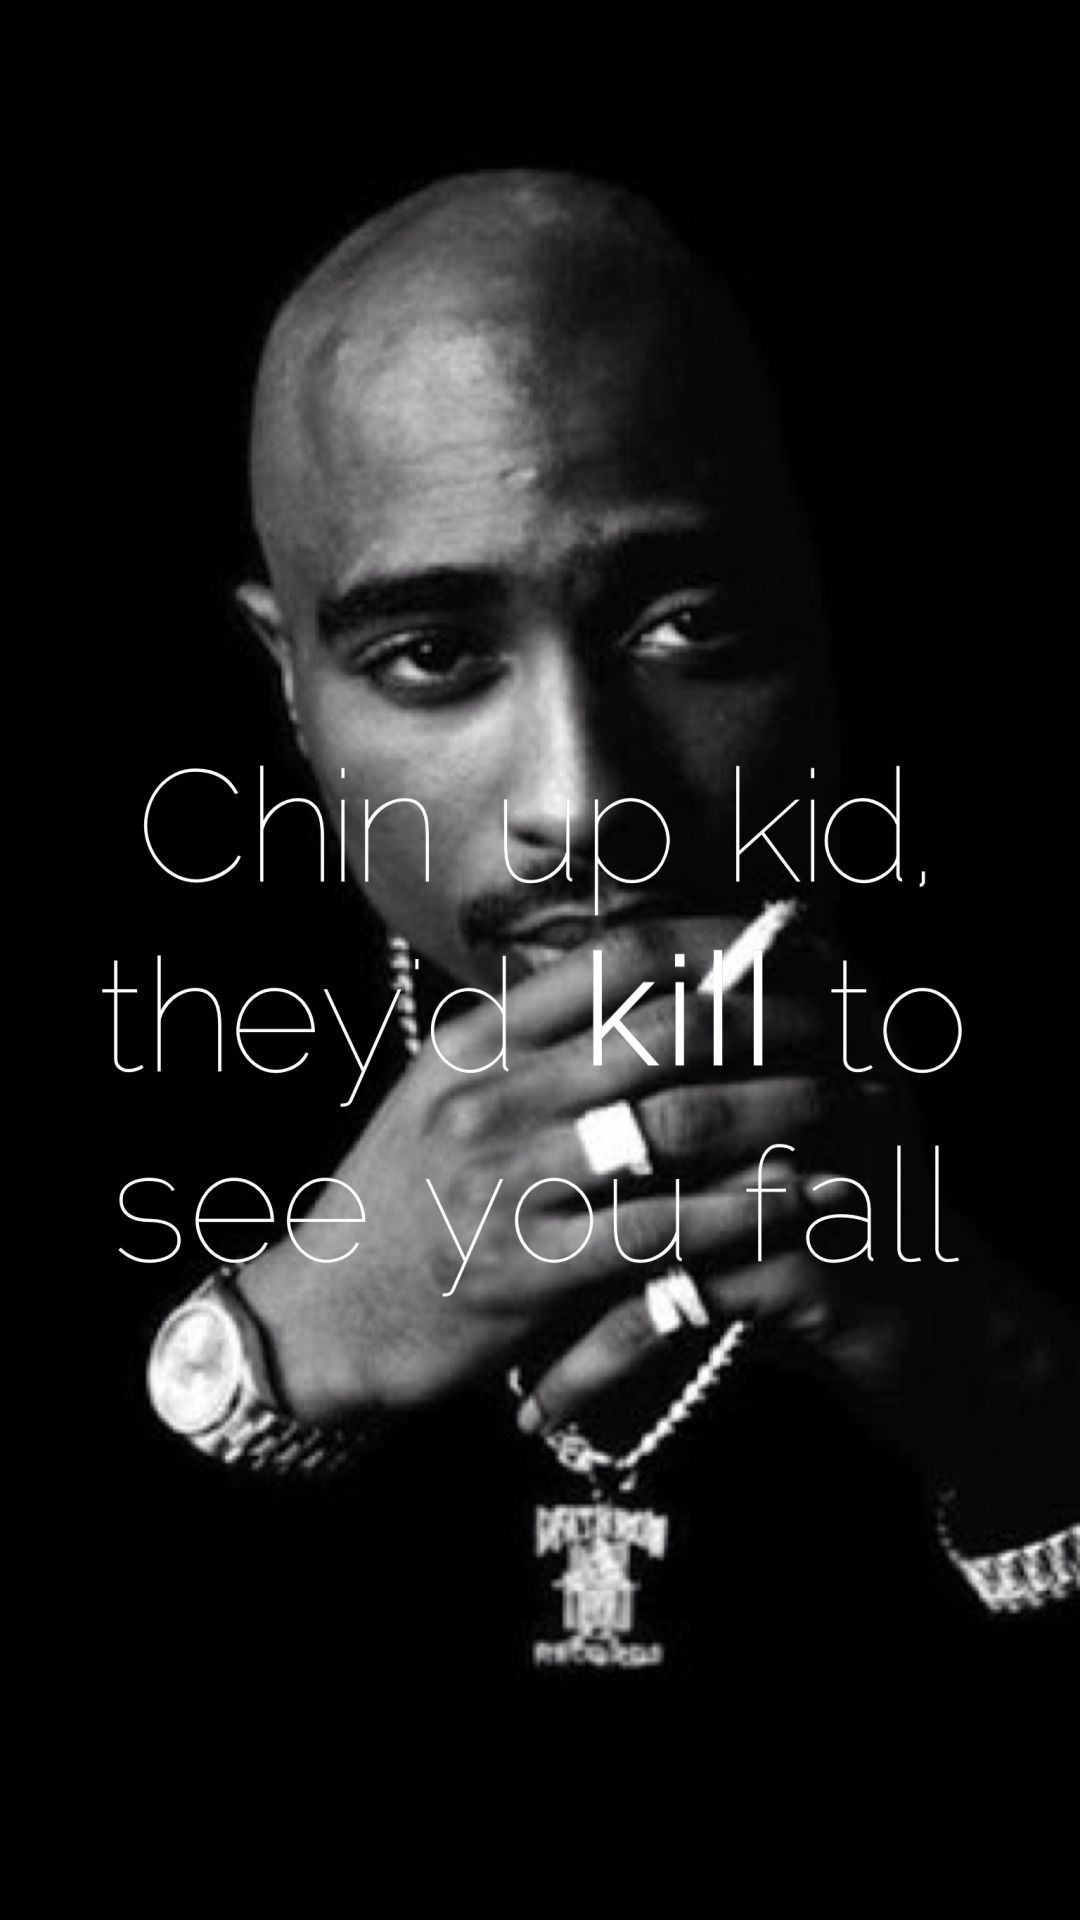 Tupac Quote iPhone Wallpapers on WallpaperDog